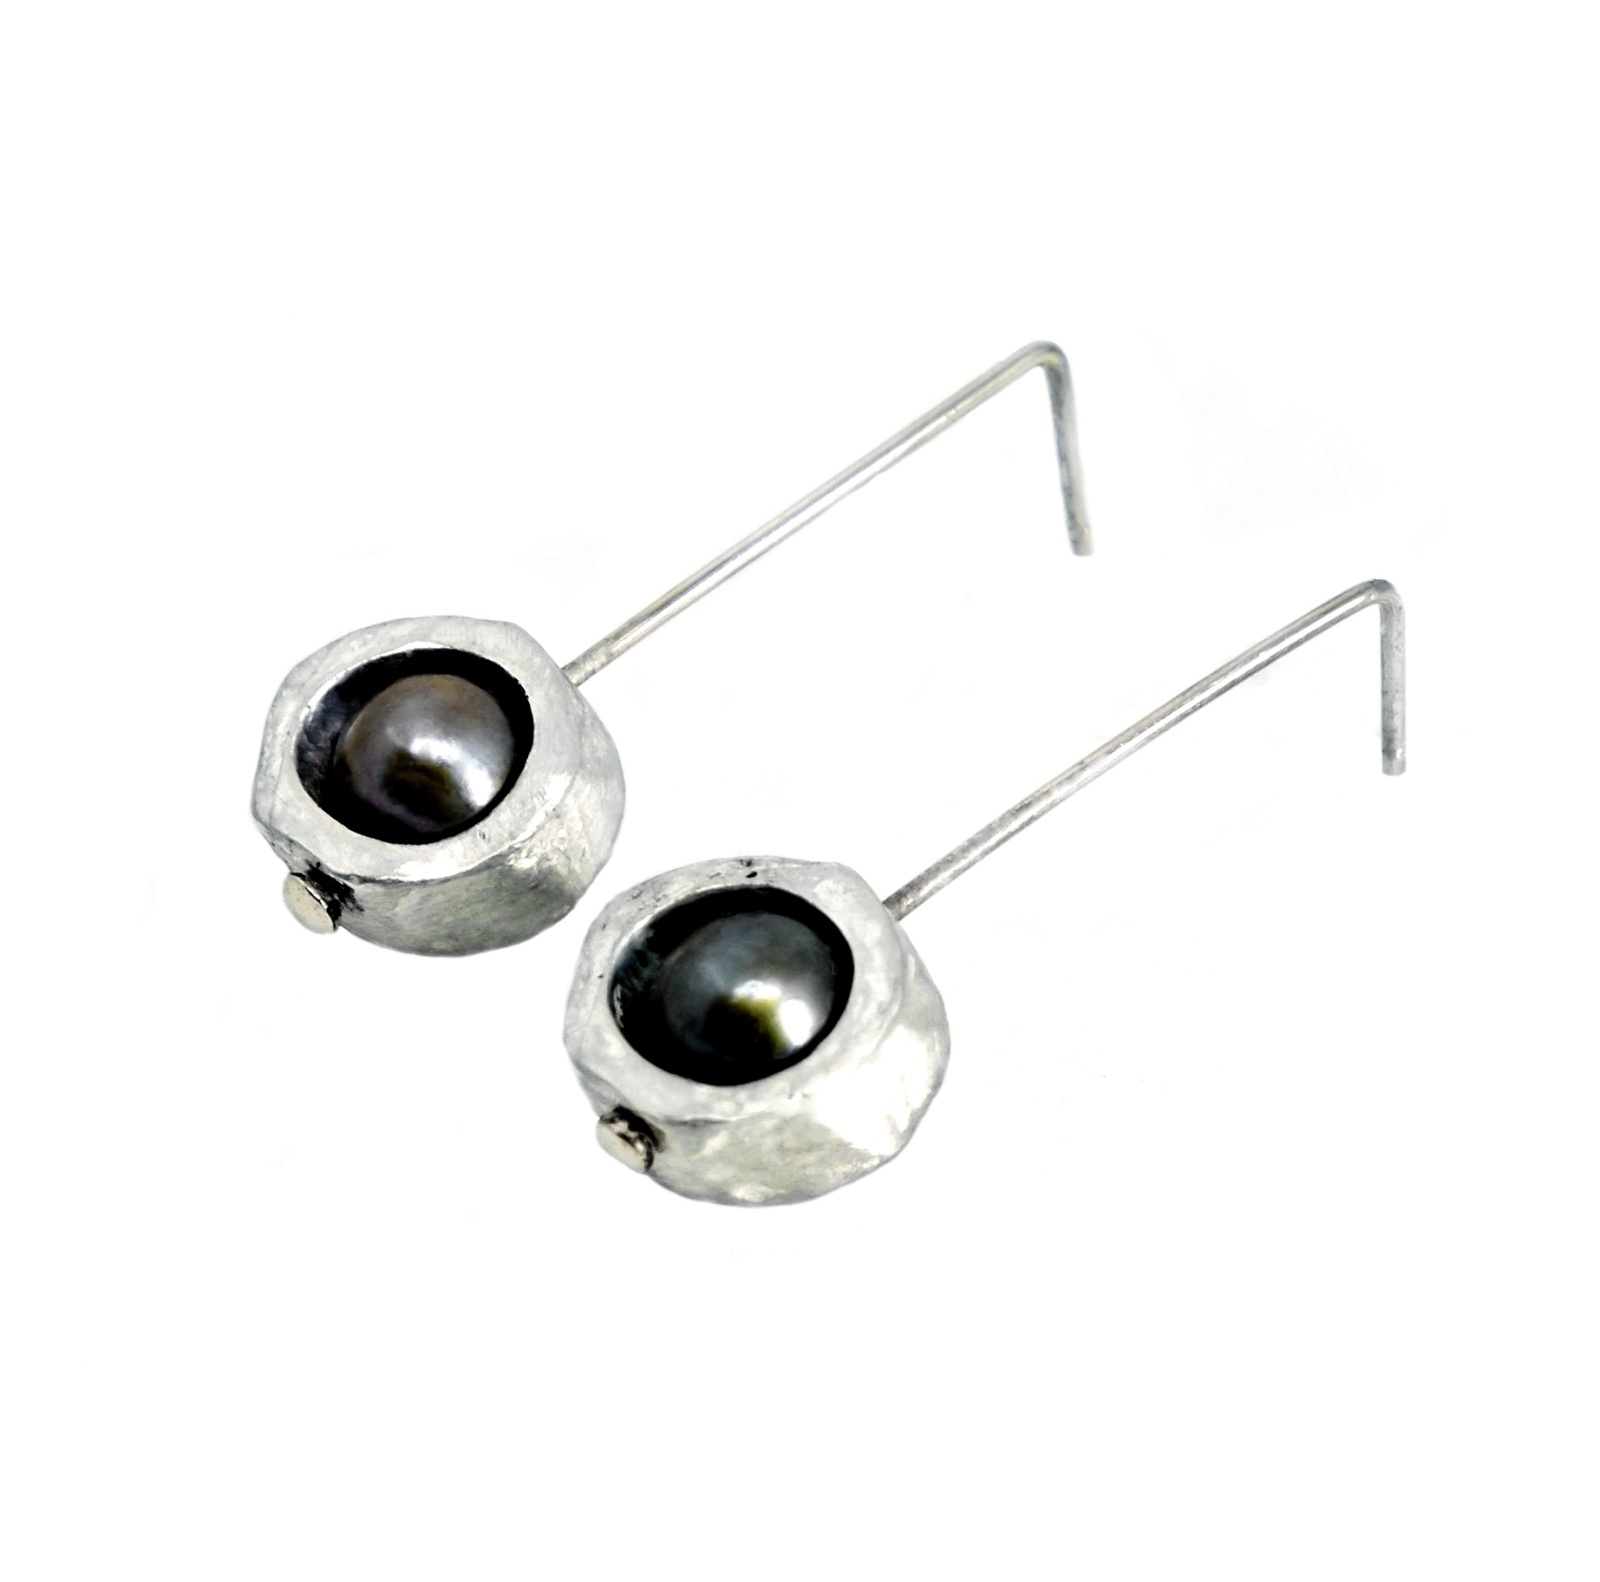 Rolling Pearls - €215 
Free Shipping

In stock ready for shipment

Details

Pearls
925 Sterling Silver
High Polished Finish
Nickel-free
Handmade


